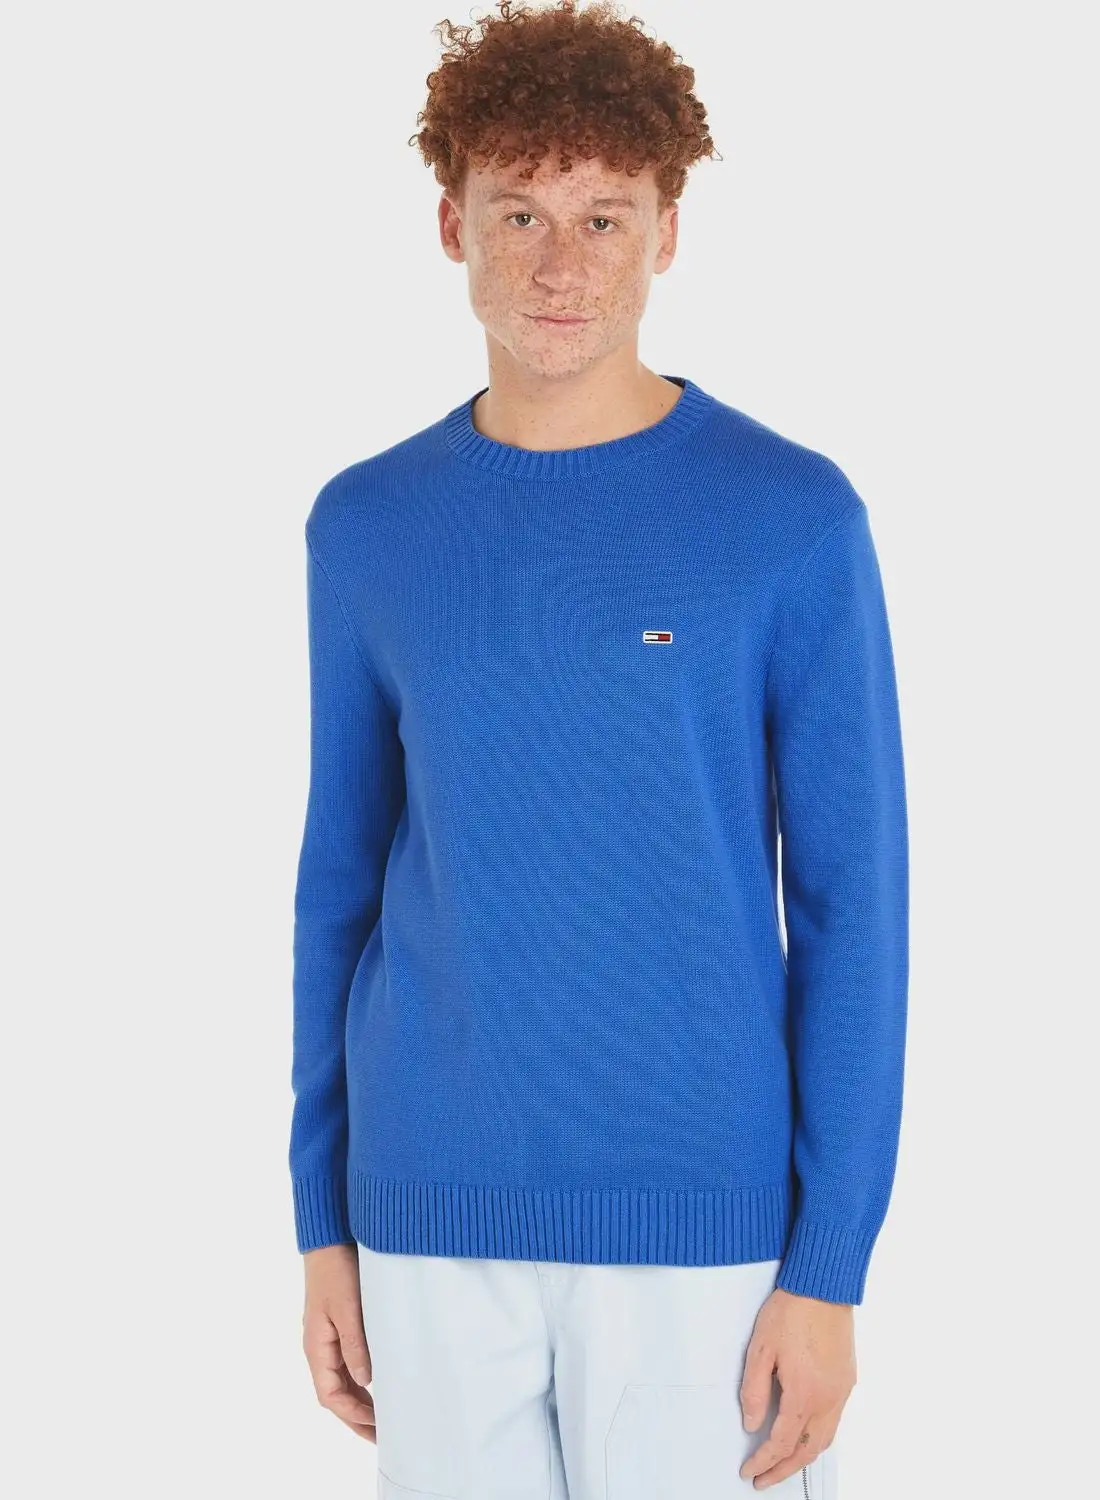 TOMMY JEANS Logo Crew Neck Sweater